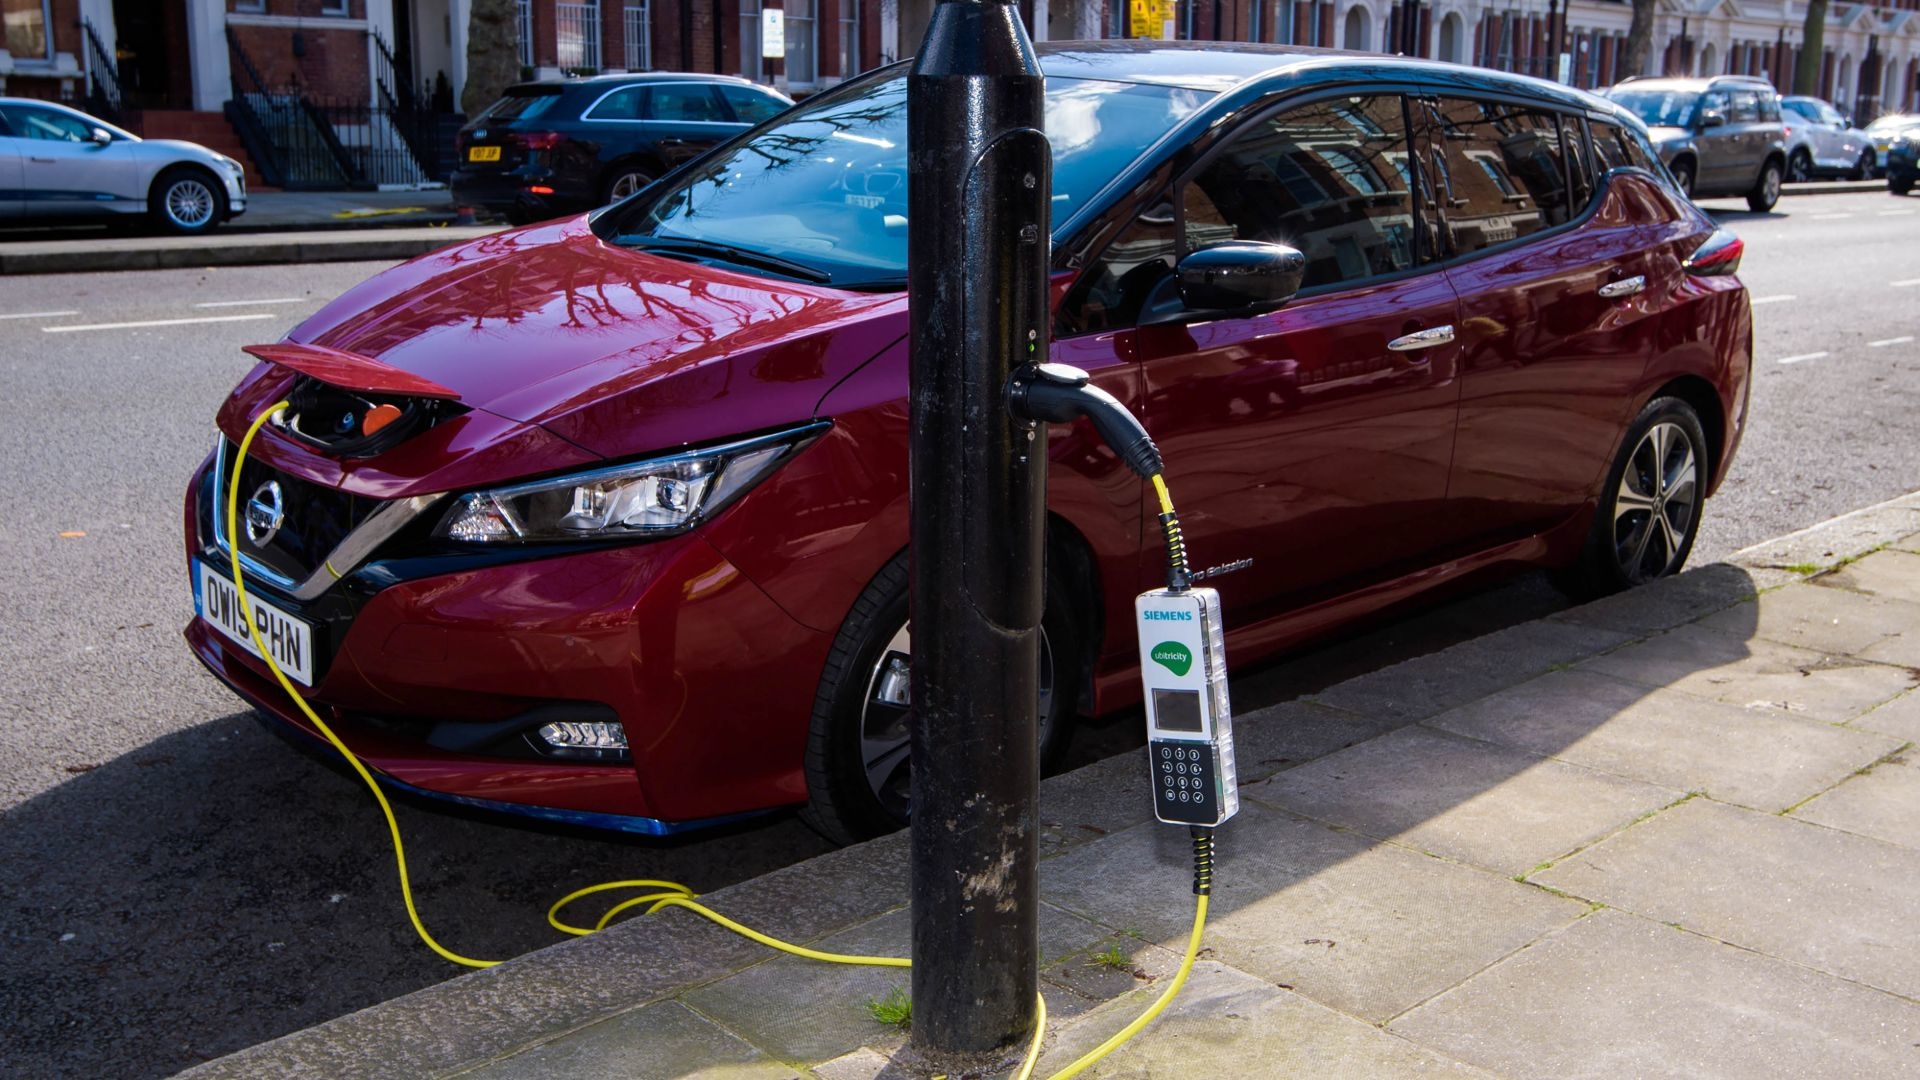 'Electric avenue' opens in london with full street lamp car charging conversion